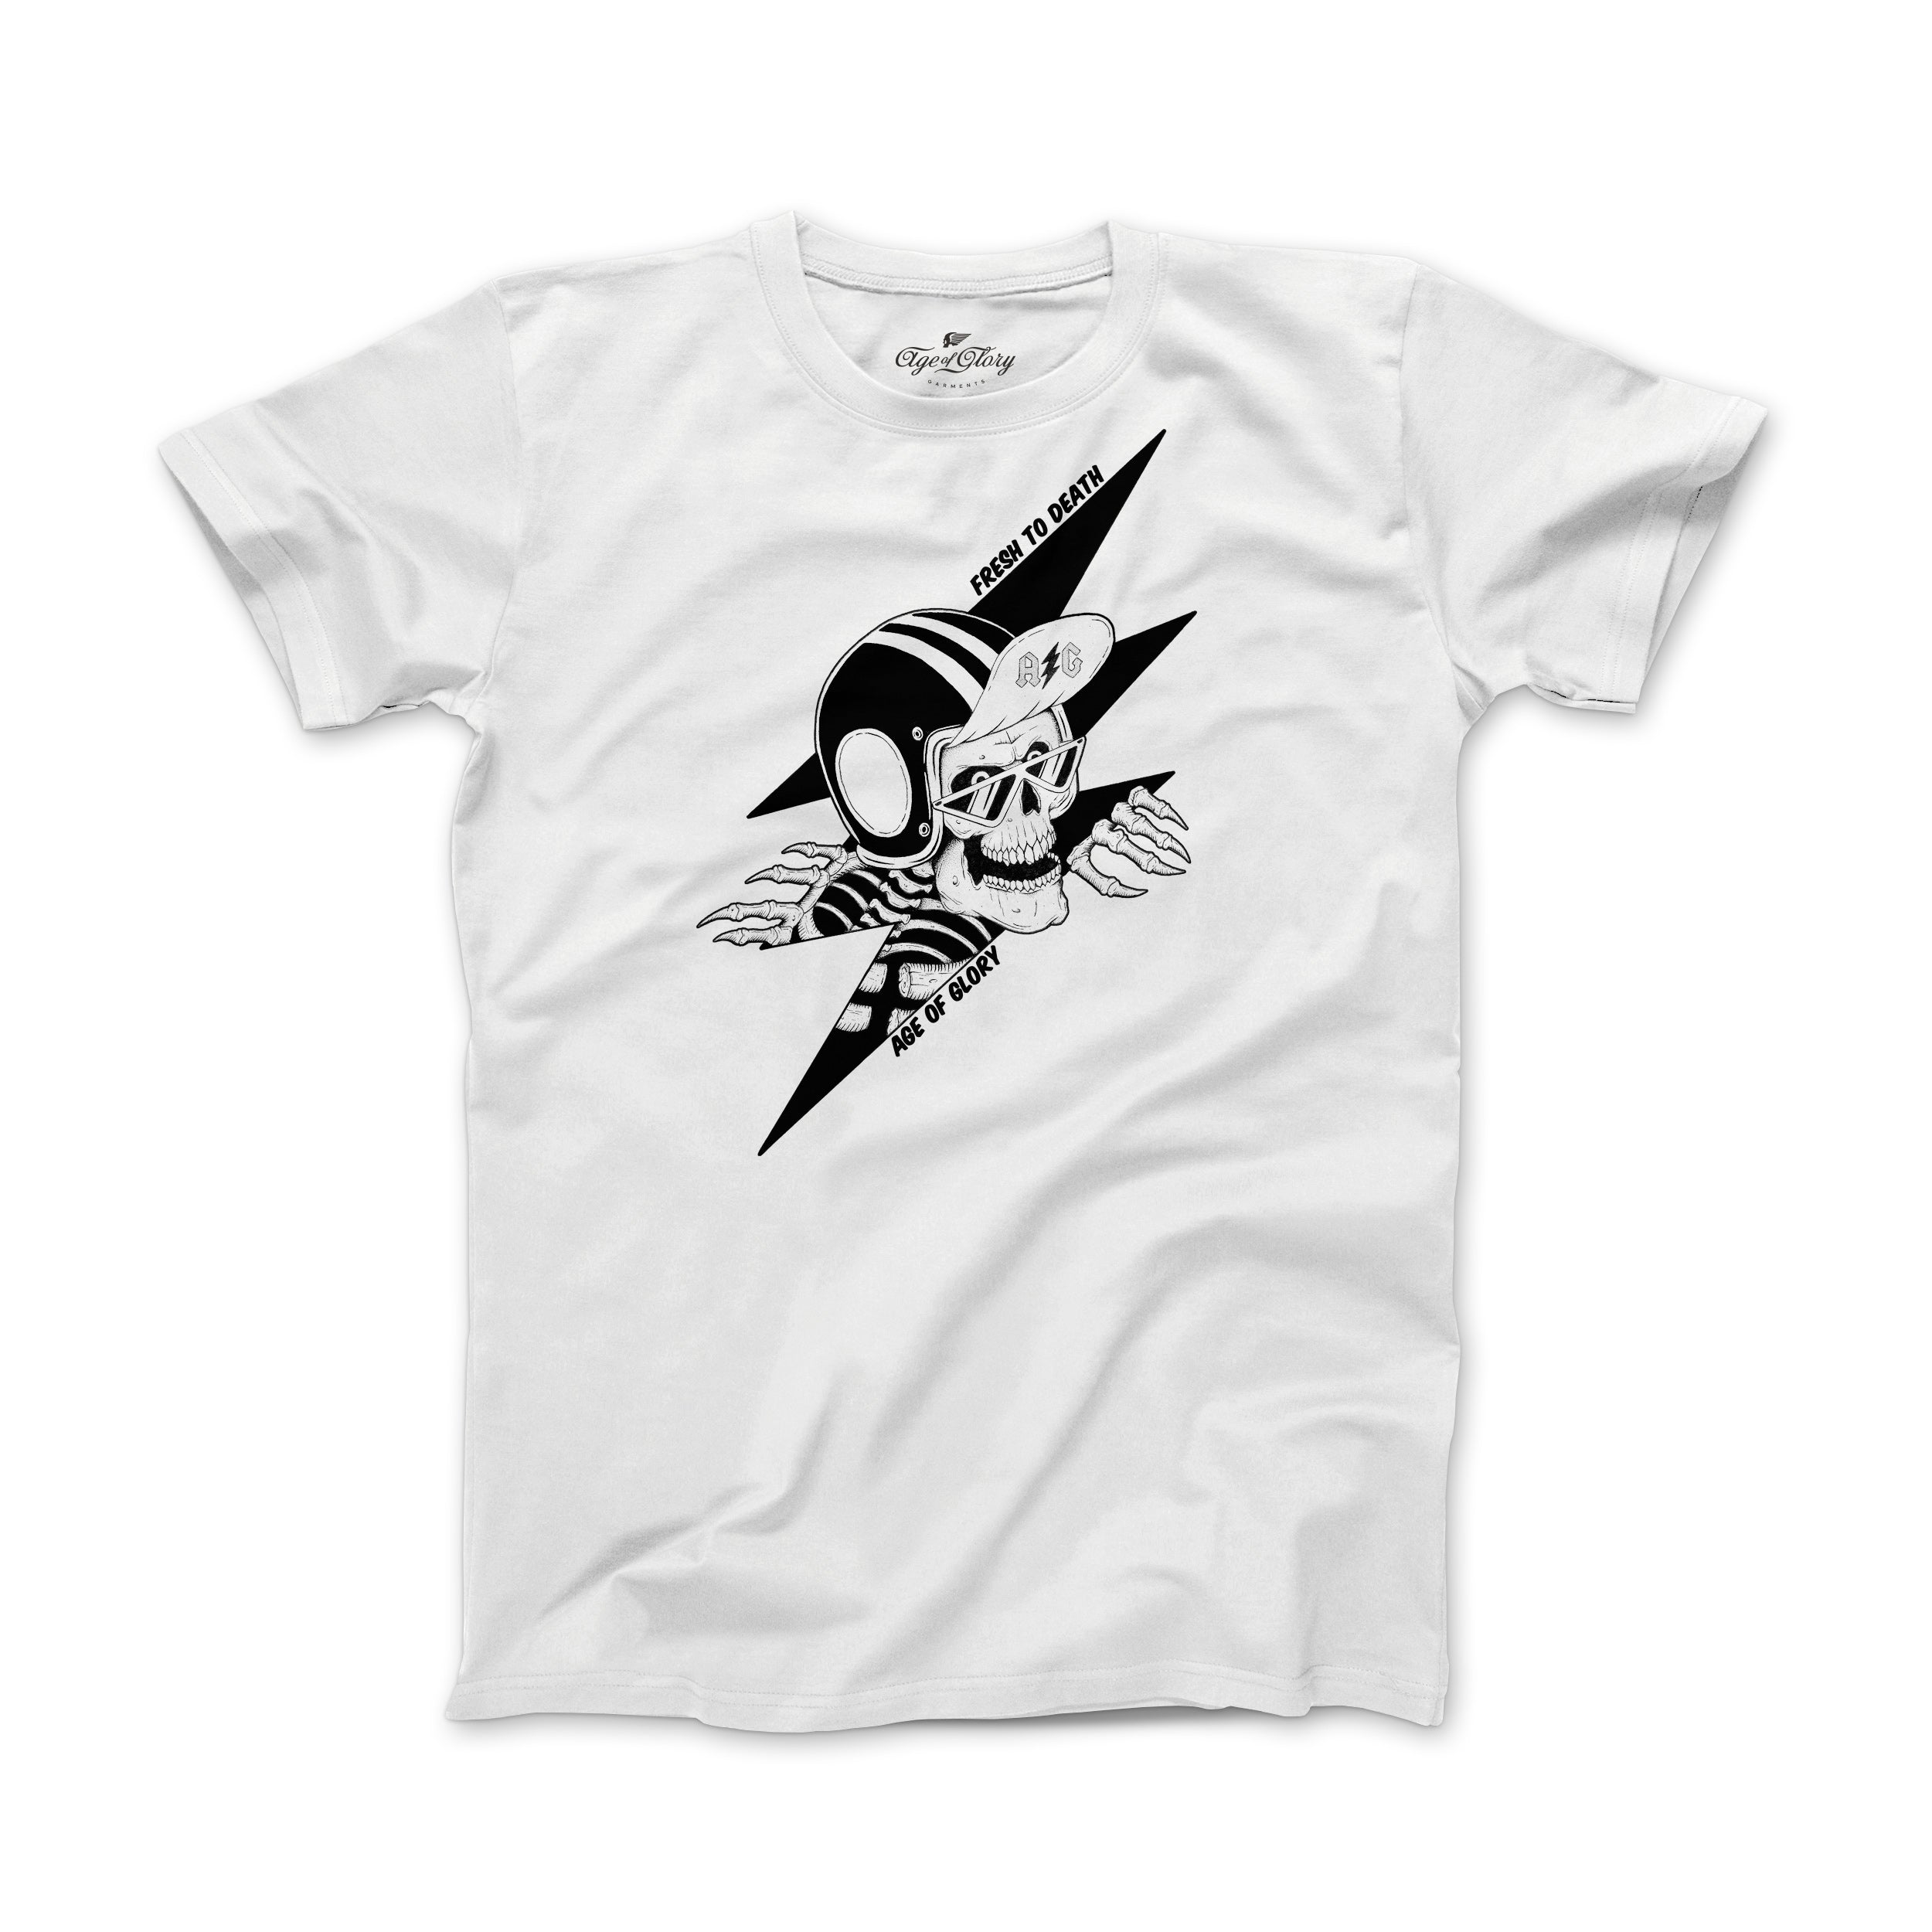 Age of Glory T-Shirt - Fresh to  Death White